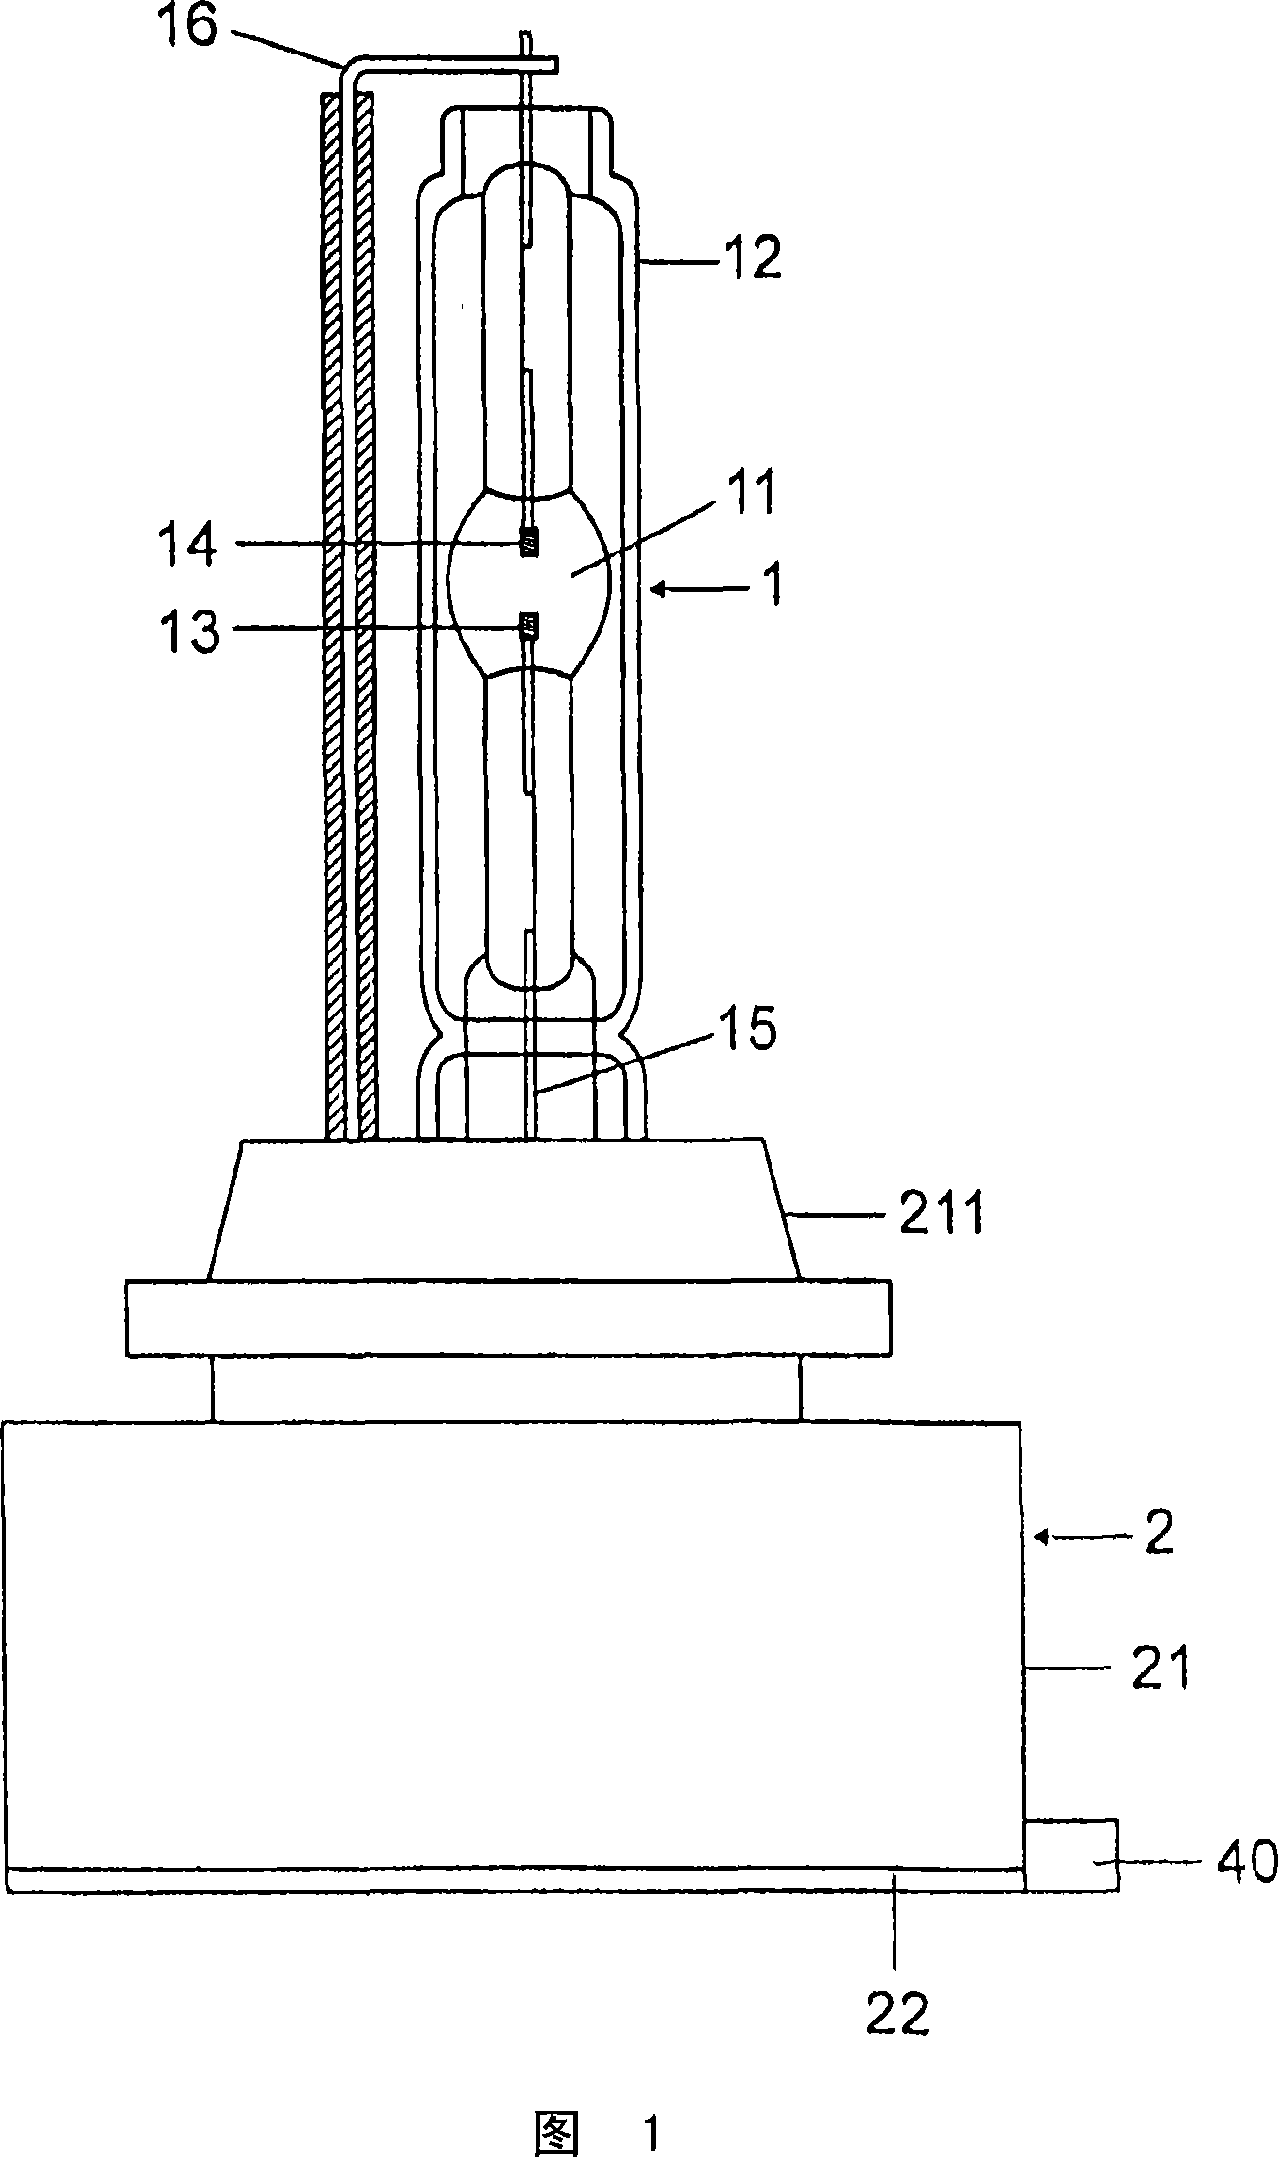 Base for a high-pressure discharge lamp, and high-pressure discharge lamp